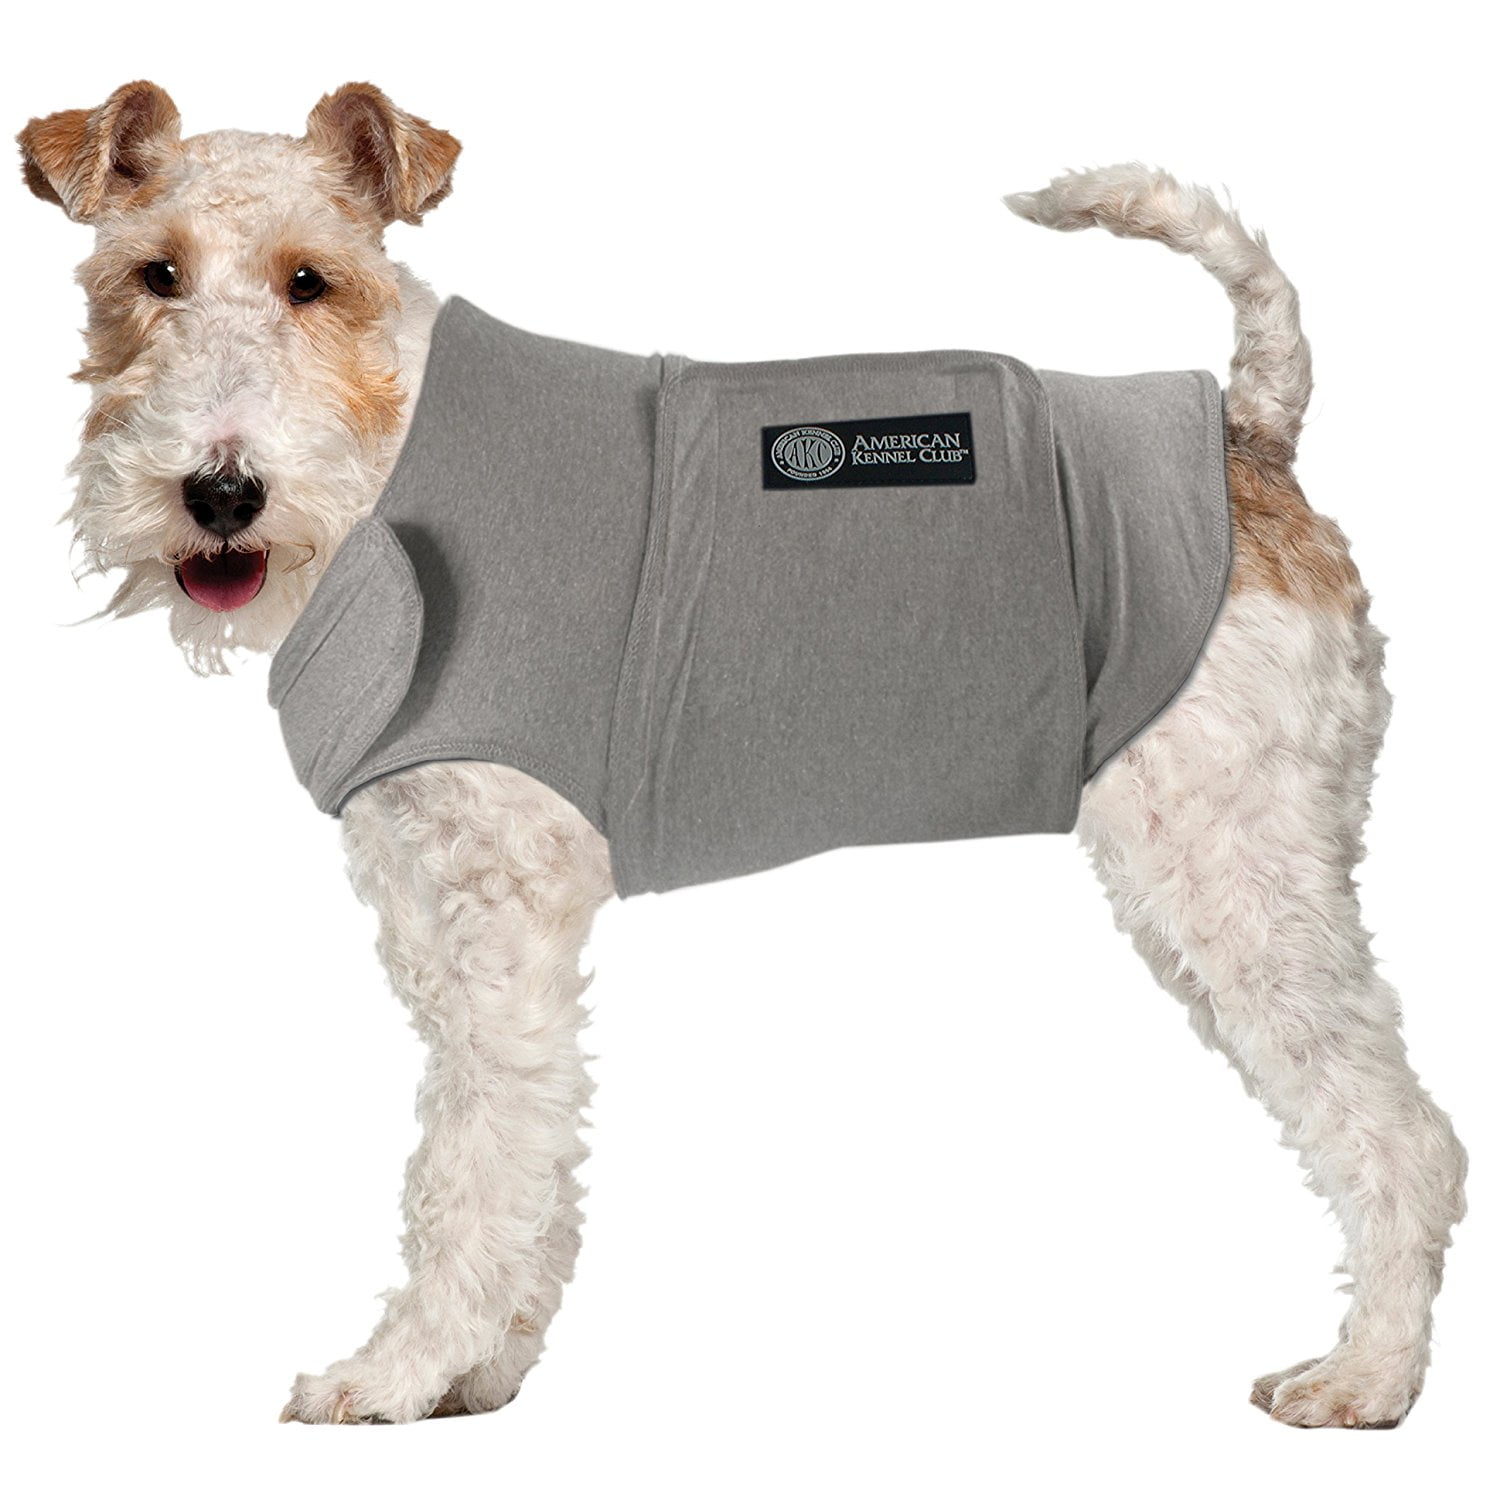 Calming jacket for dogs